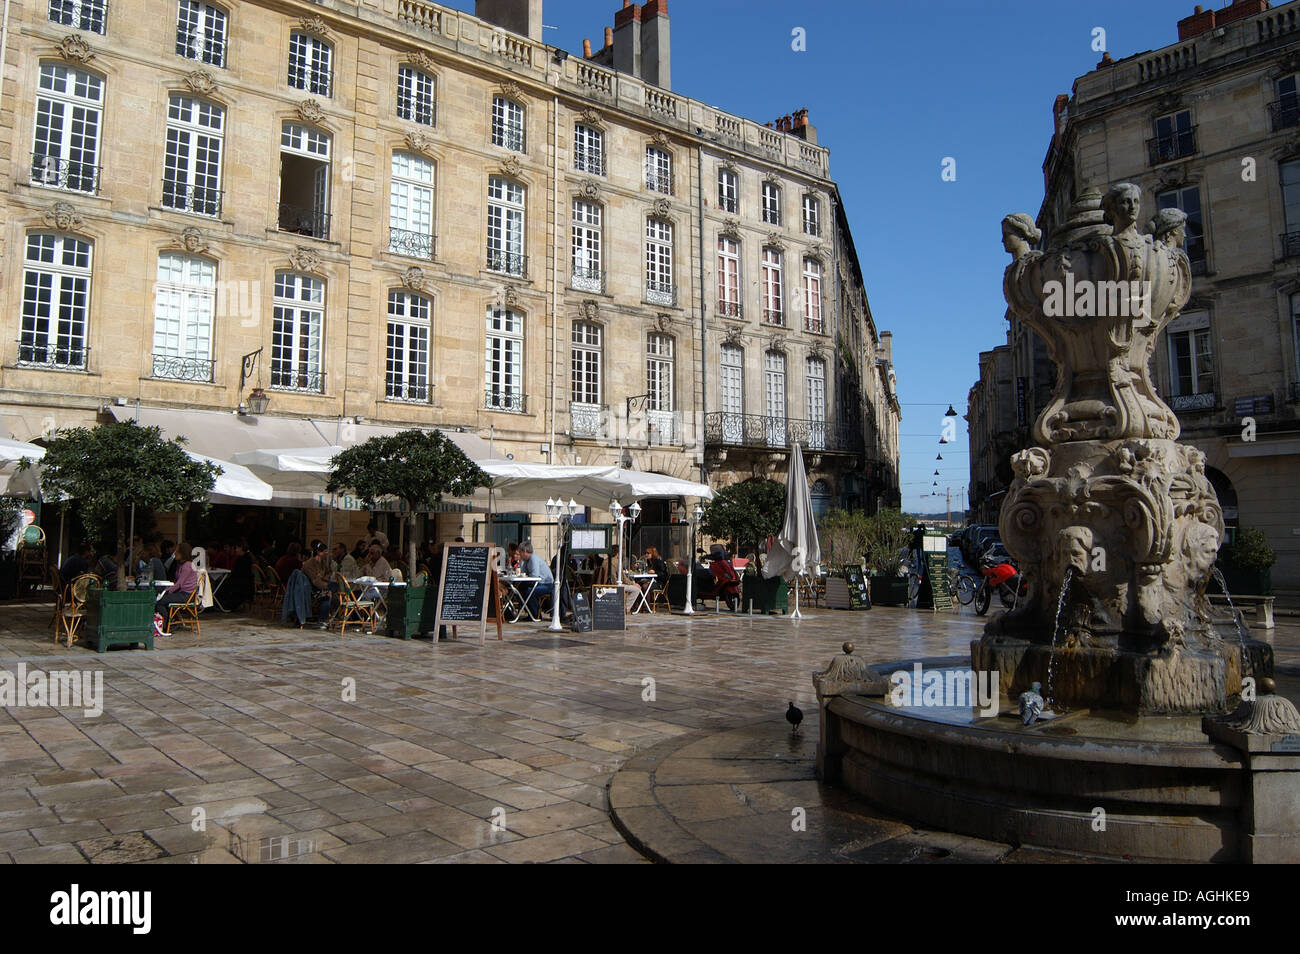 Restaurants and fountain in Place du Parliament Bordeaux France Stock Photo